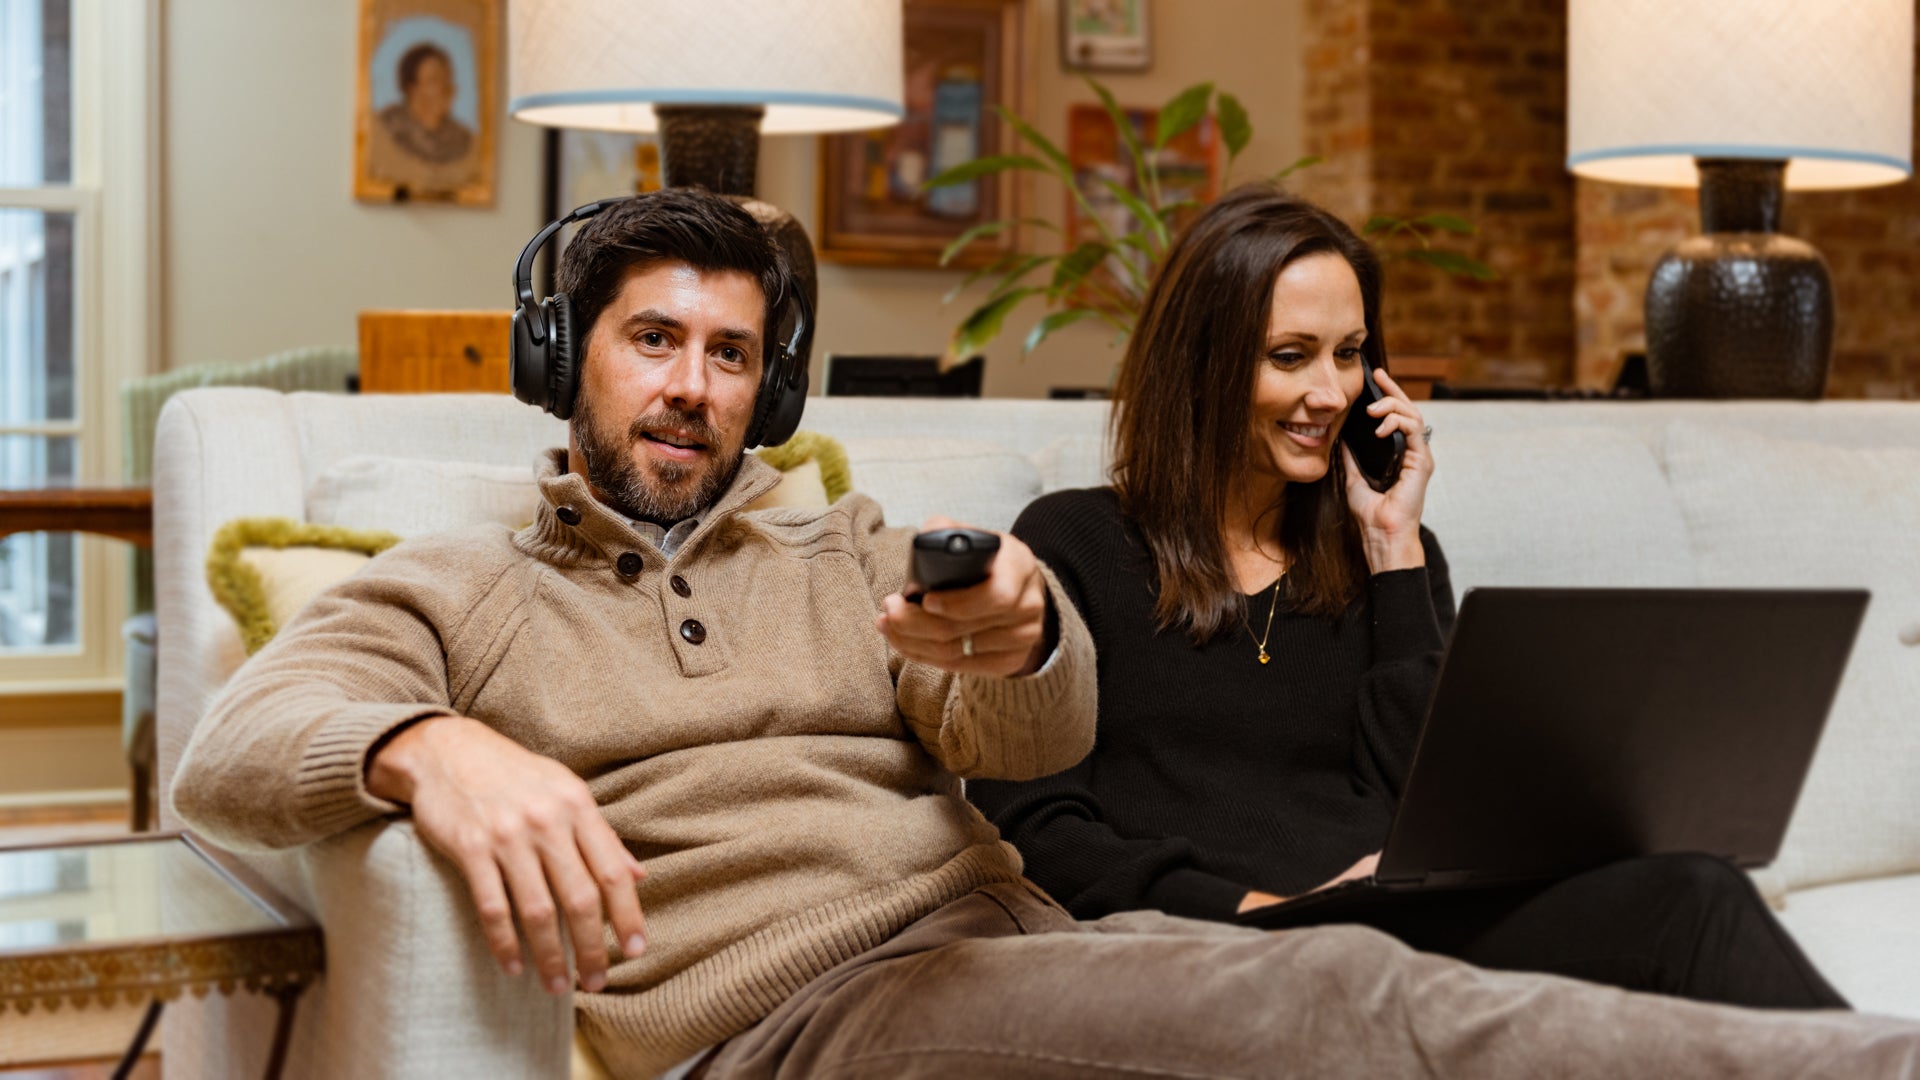 A man wearing Audeara headphones watches the TV while sitting next to his wife on the couch. The wife is on talking on the phone with a laptop in her lap.